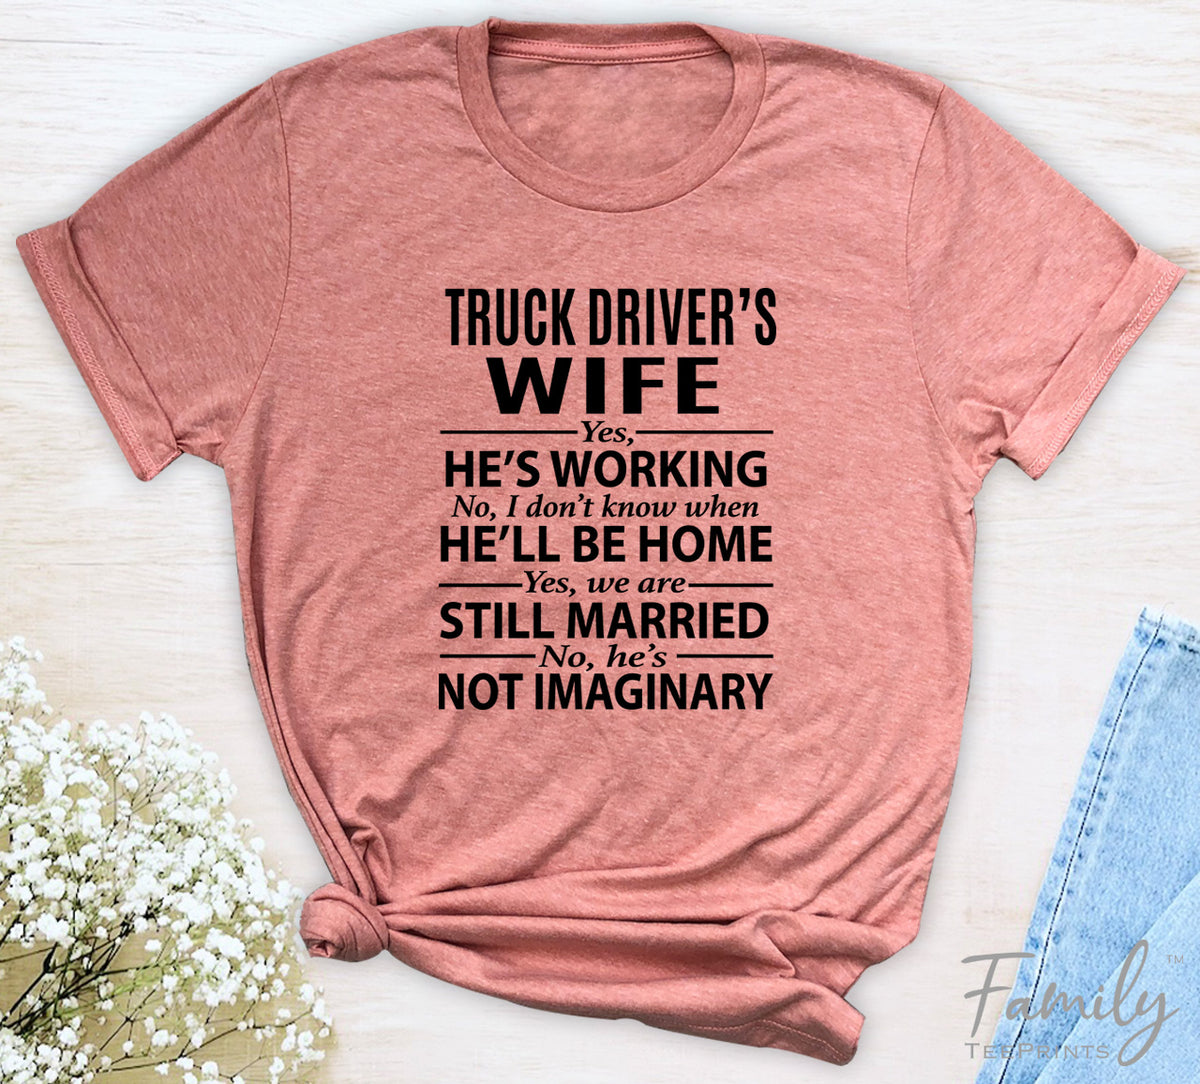 Truck Driver's Wife Yes, He's Working - Unisex T-shirt - Truck Driver's Wife Shirt - Gift For Truck Driver's Wife